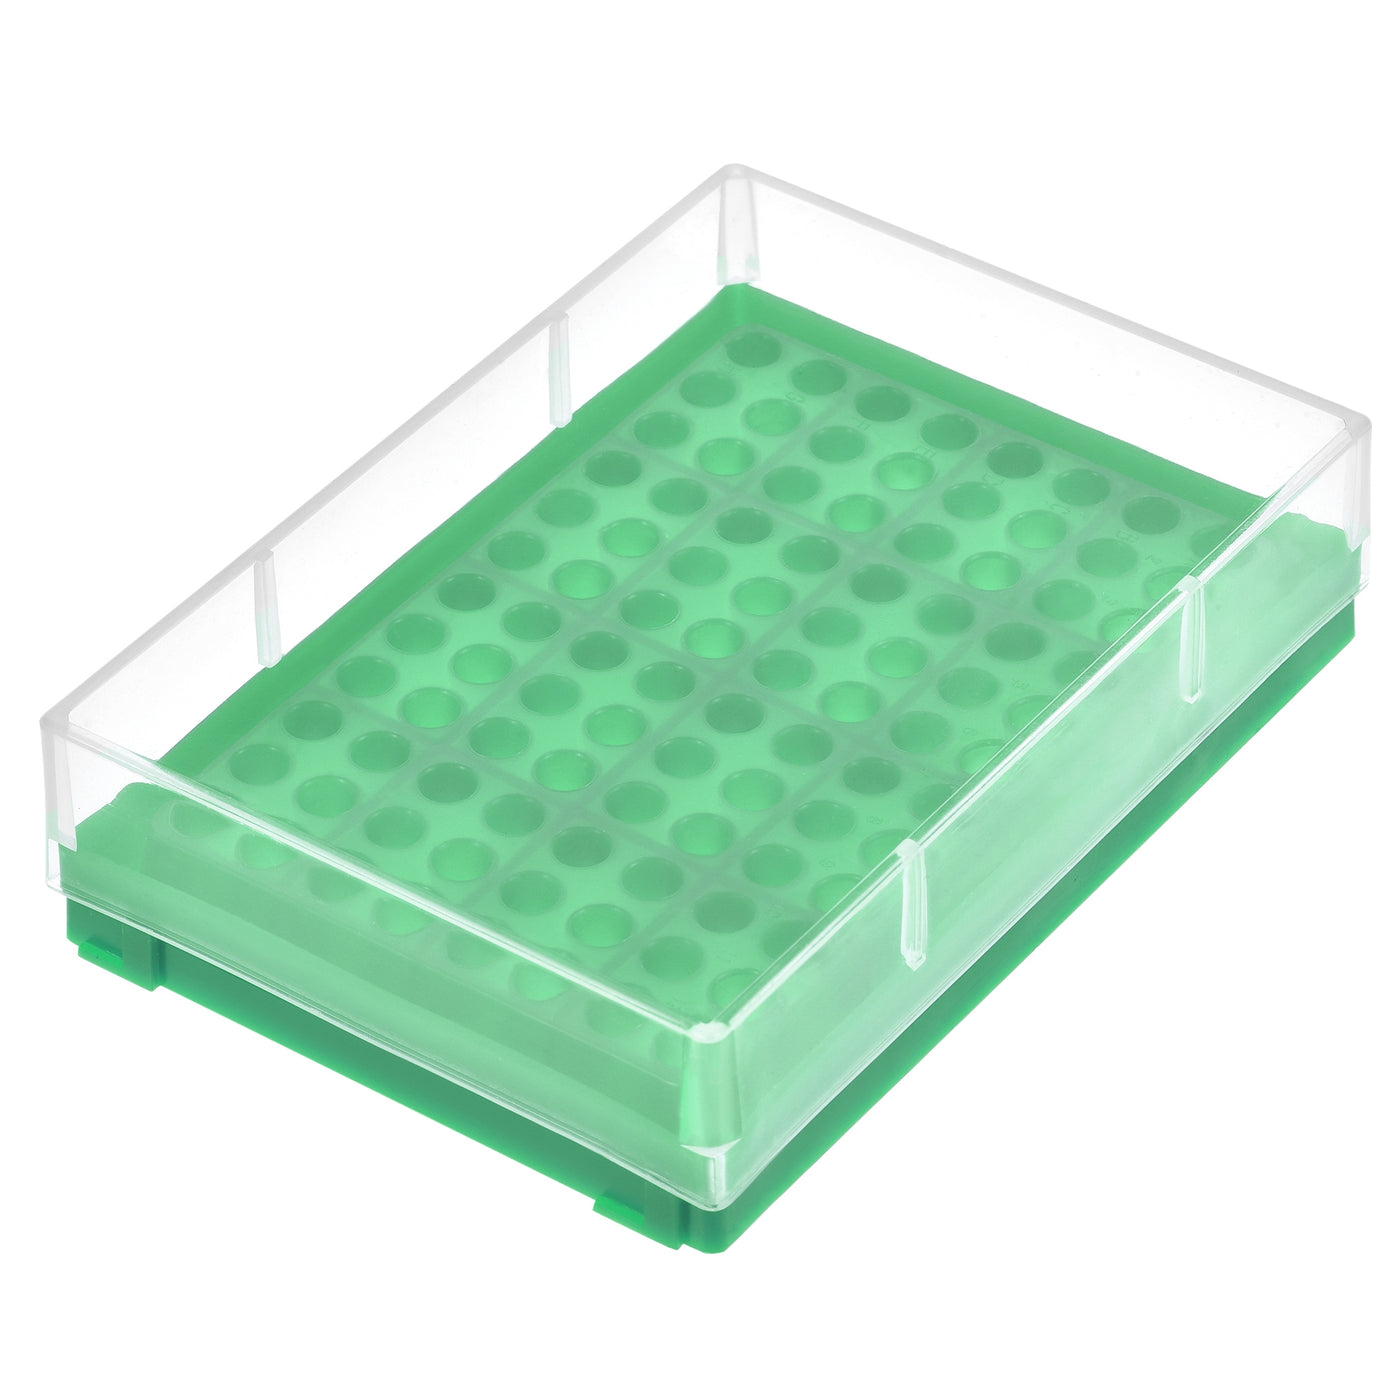 uxcell Uxcell Centrifuge Tube Freezer Storage Box 96-Well PP Holder Green for 0.2ml Tubes